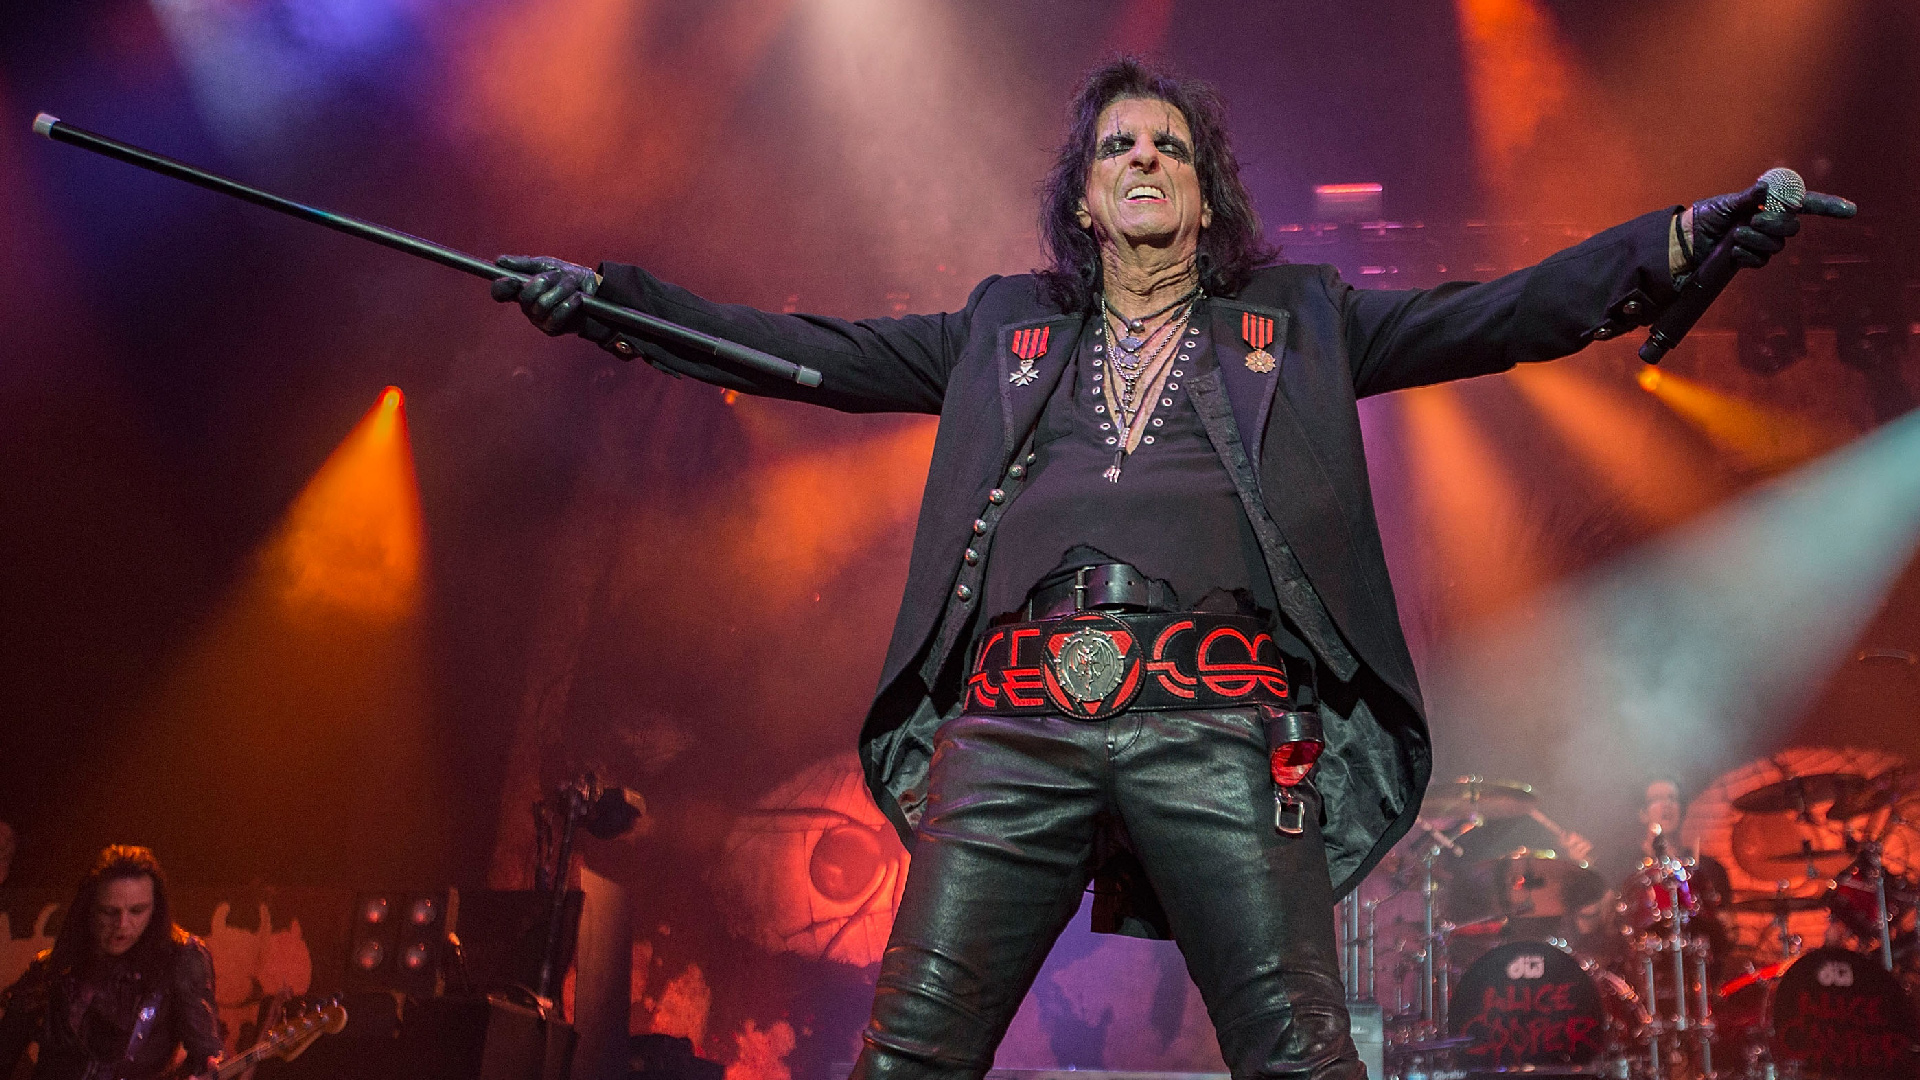 Musician Alice Cooper performs on stage at Pechanga Casino on August 11, 2018 in Temecula, California